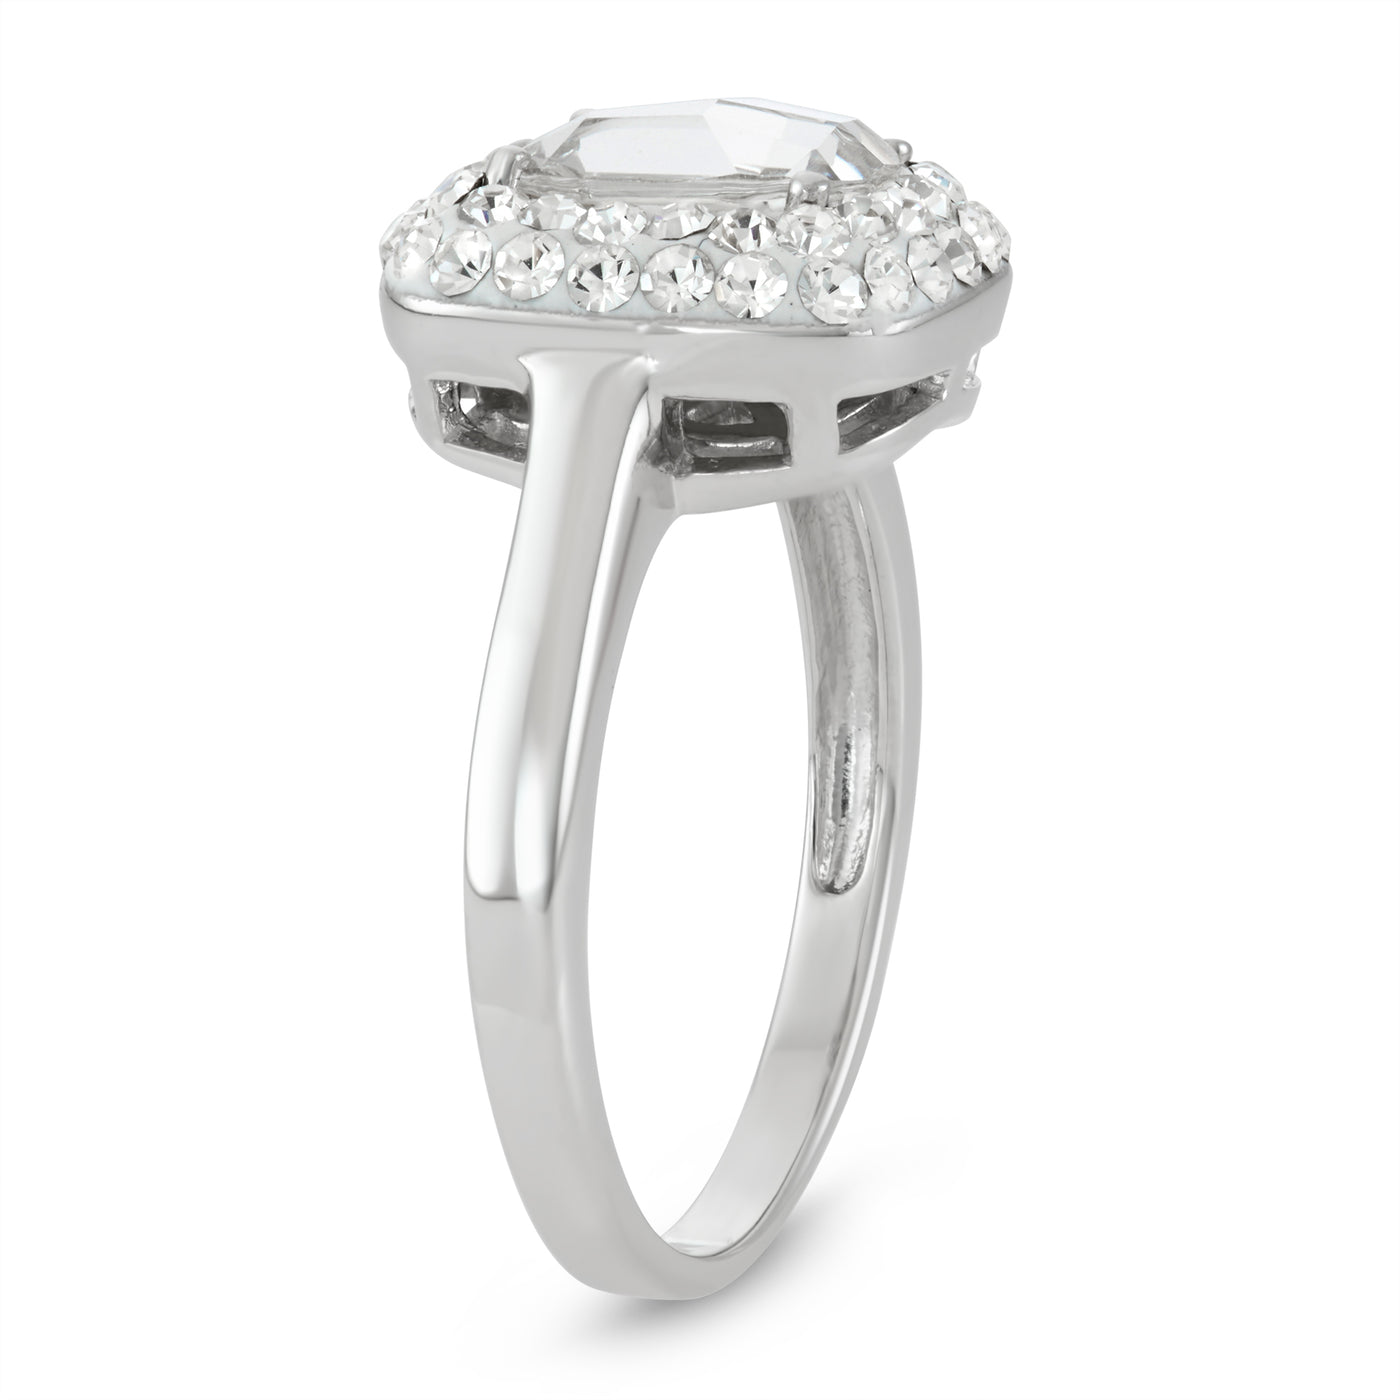 Rhodium Plated Sterling Silver Square Ring With Crystal Elements